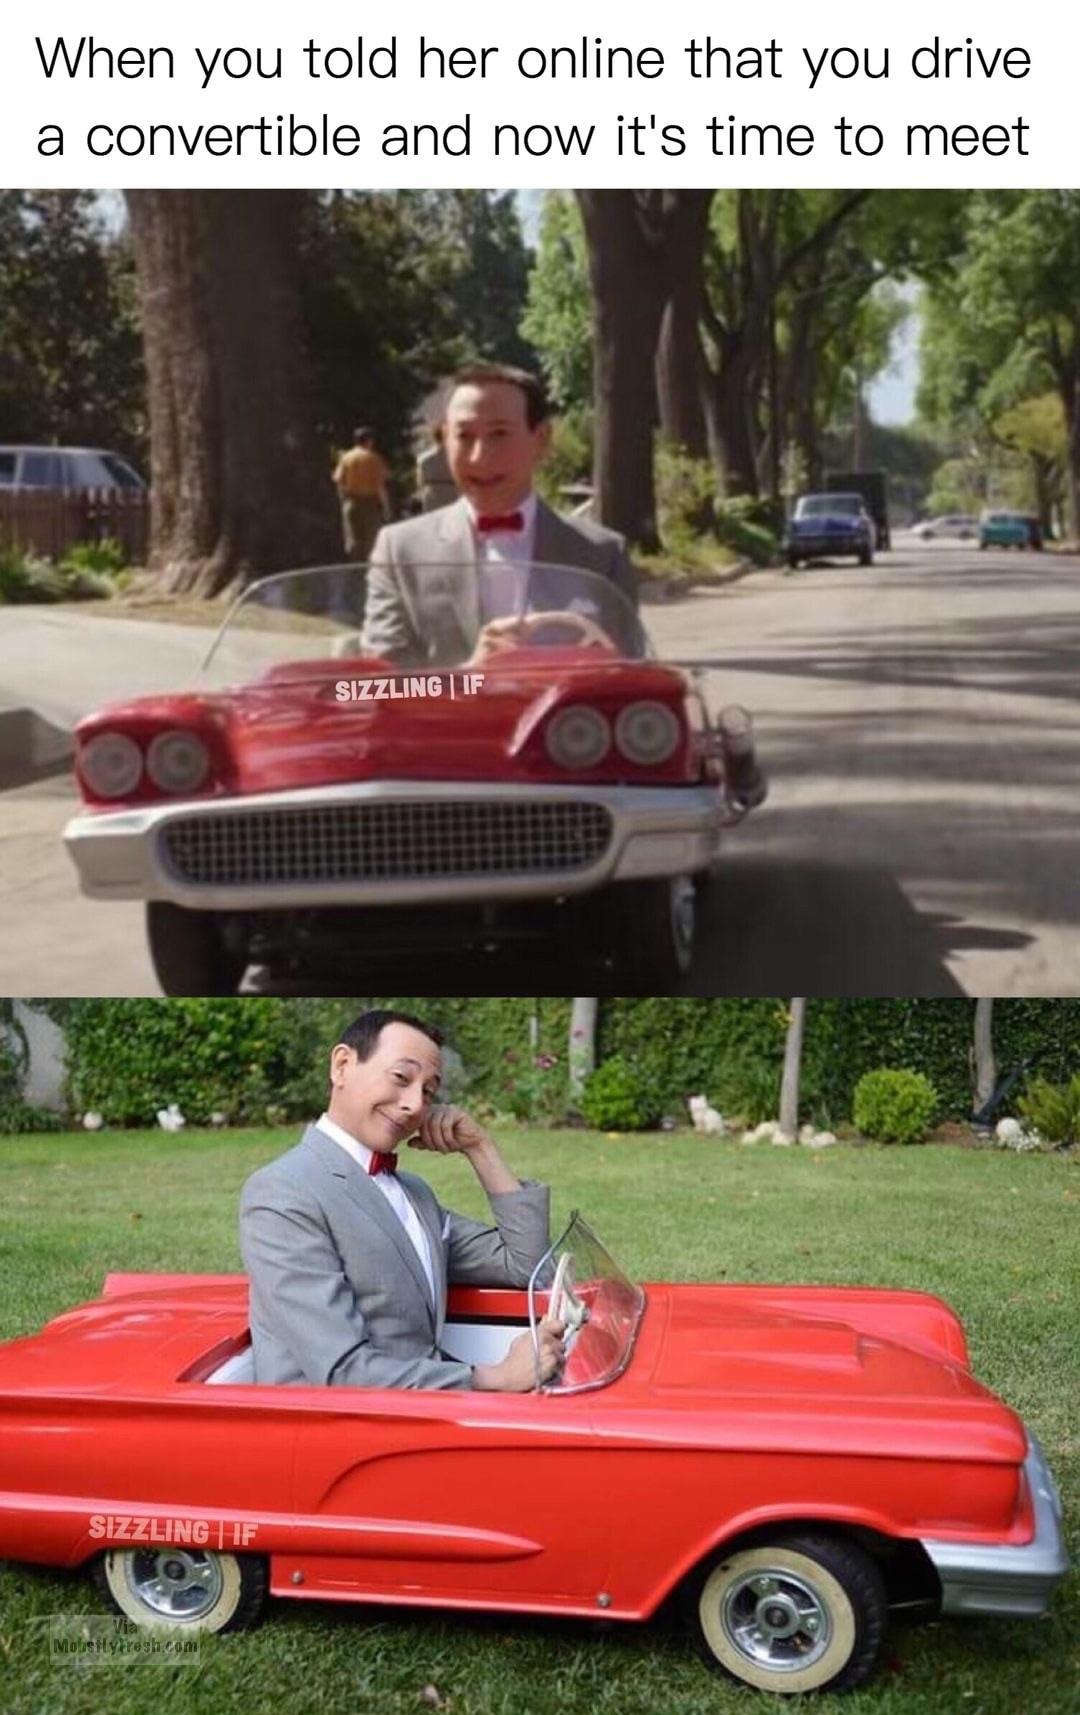 peewee herman car - When you told her online that you drive a convertible and now it's time to meet Sizzling If Sizzling If Molisiyaresh.com